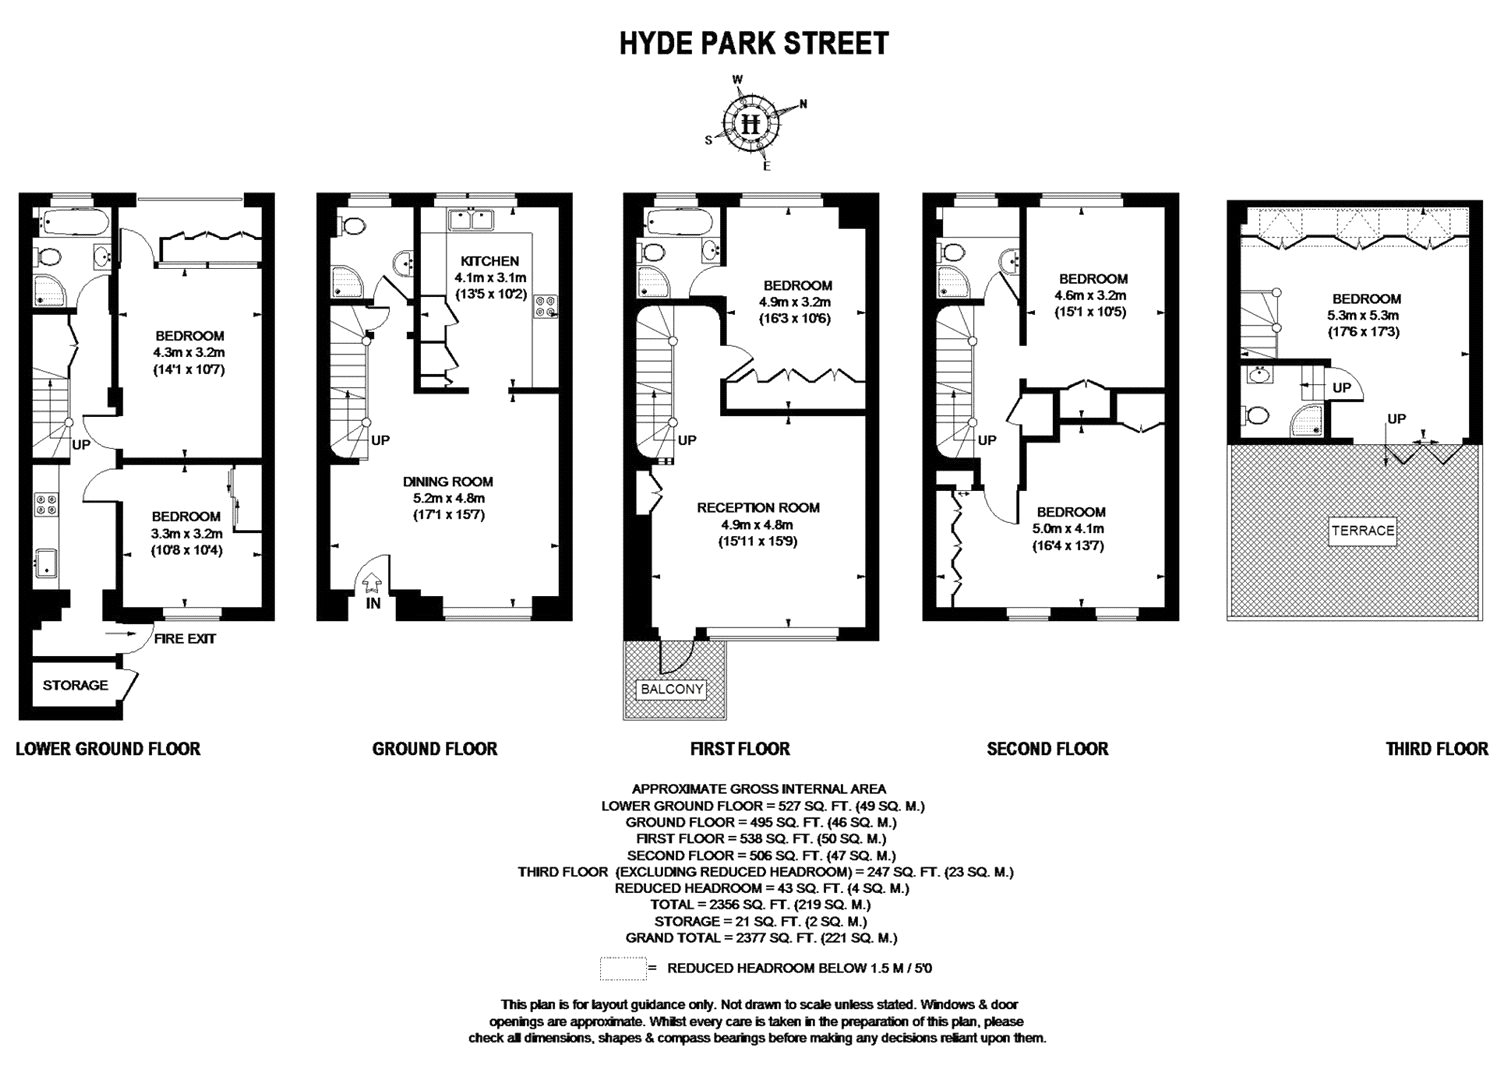 6 Bedrooms  to rent in Hyde Park Street, Hyde Park W2